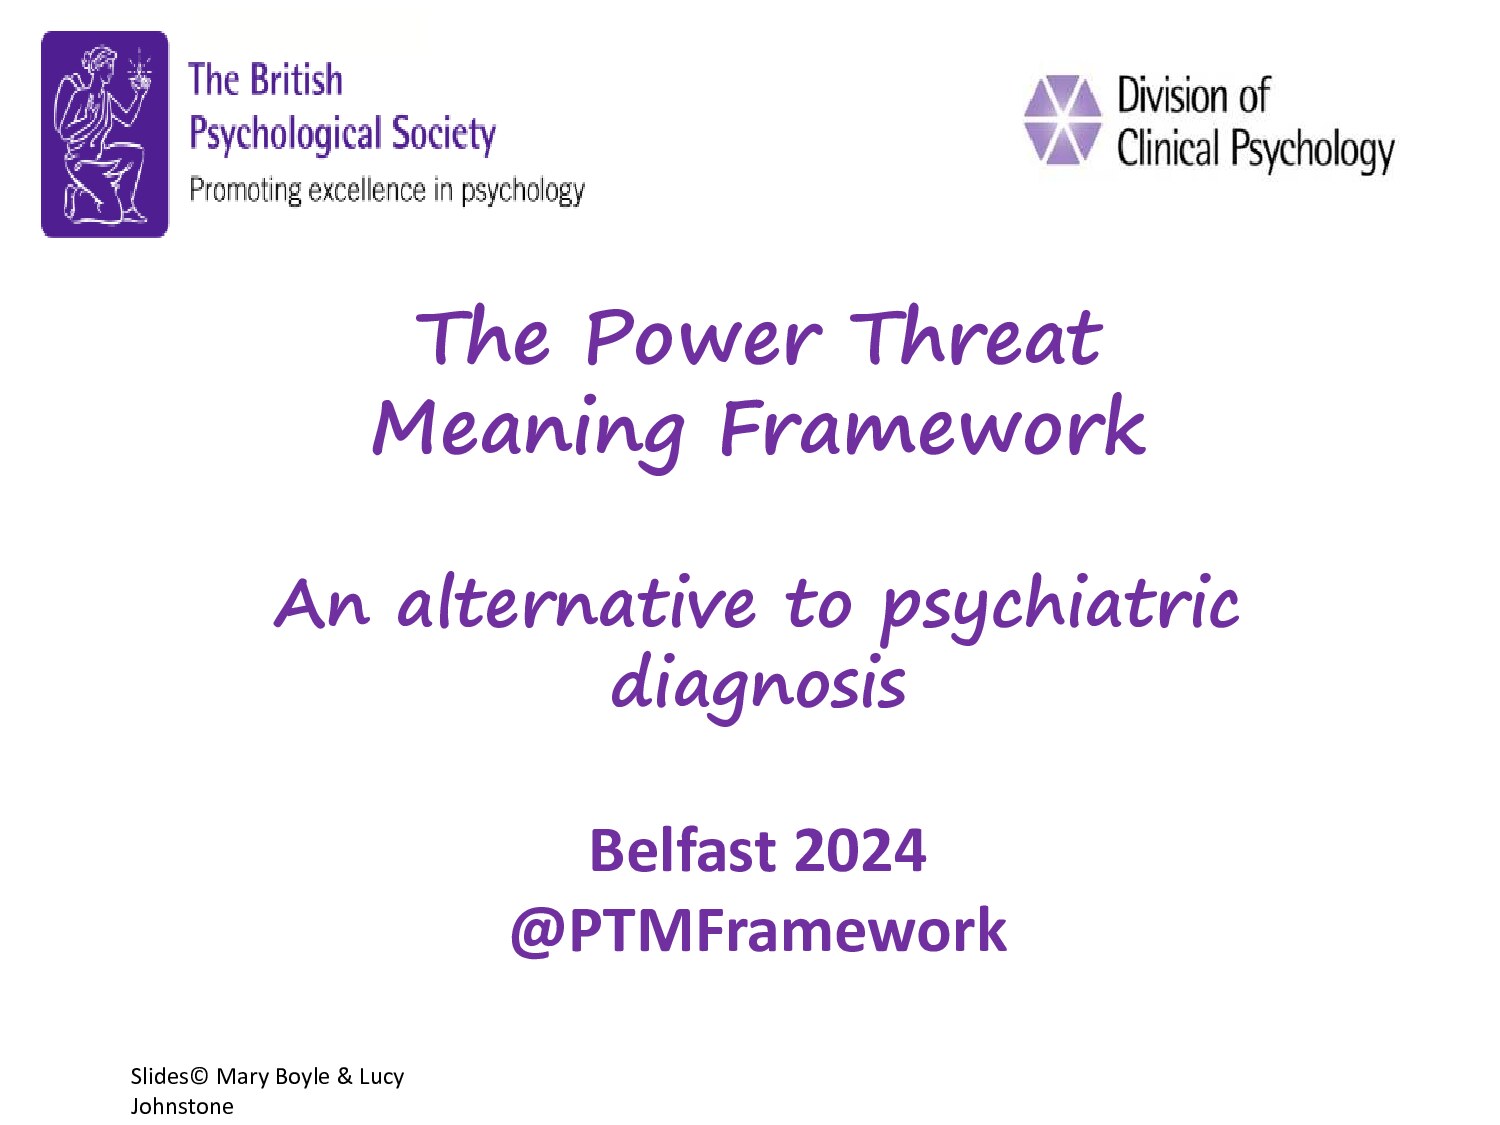 The Power Threat Meaning Framework – An Alternative to Psychiatric Diagnosis